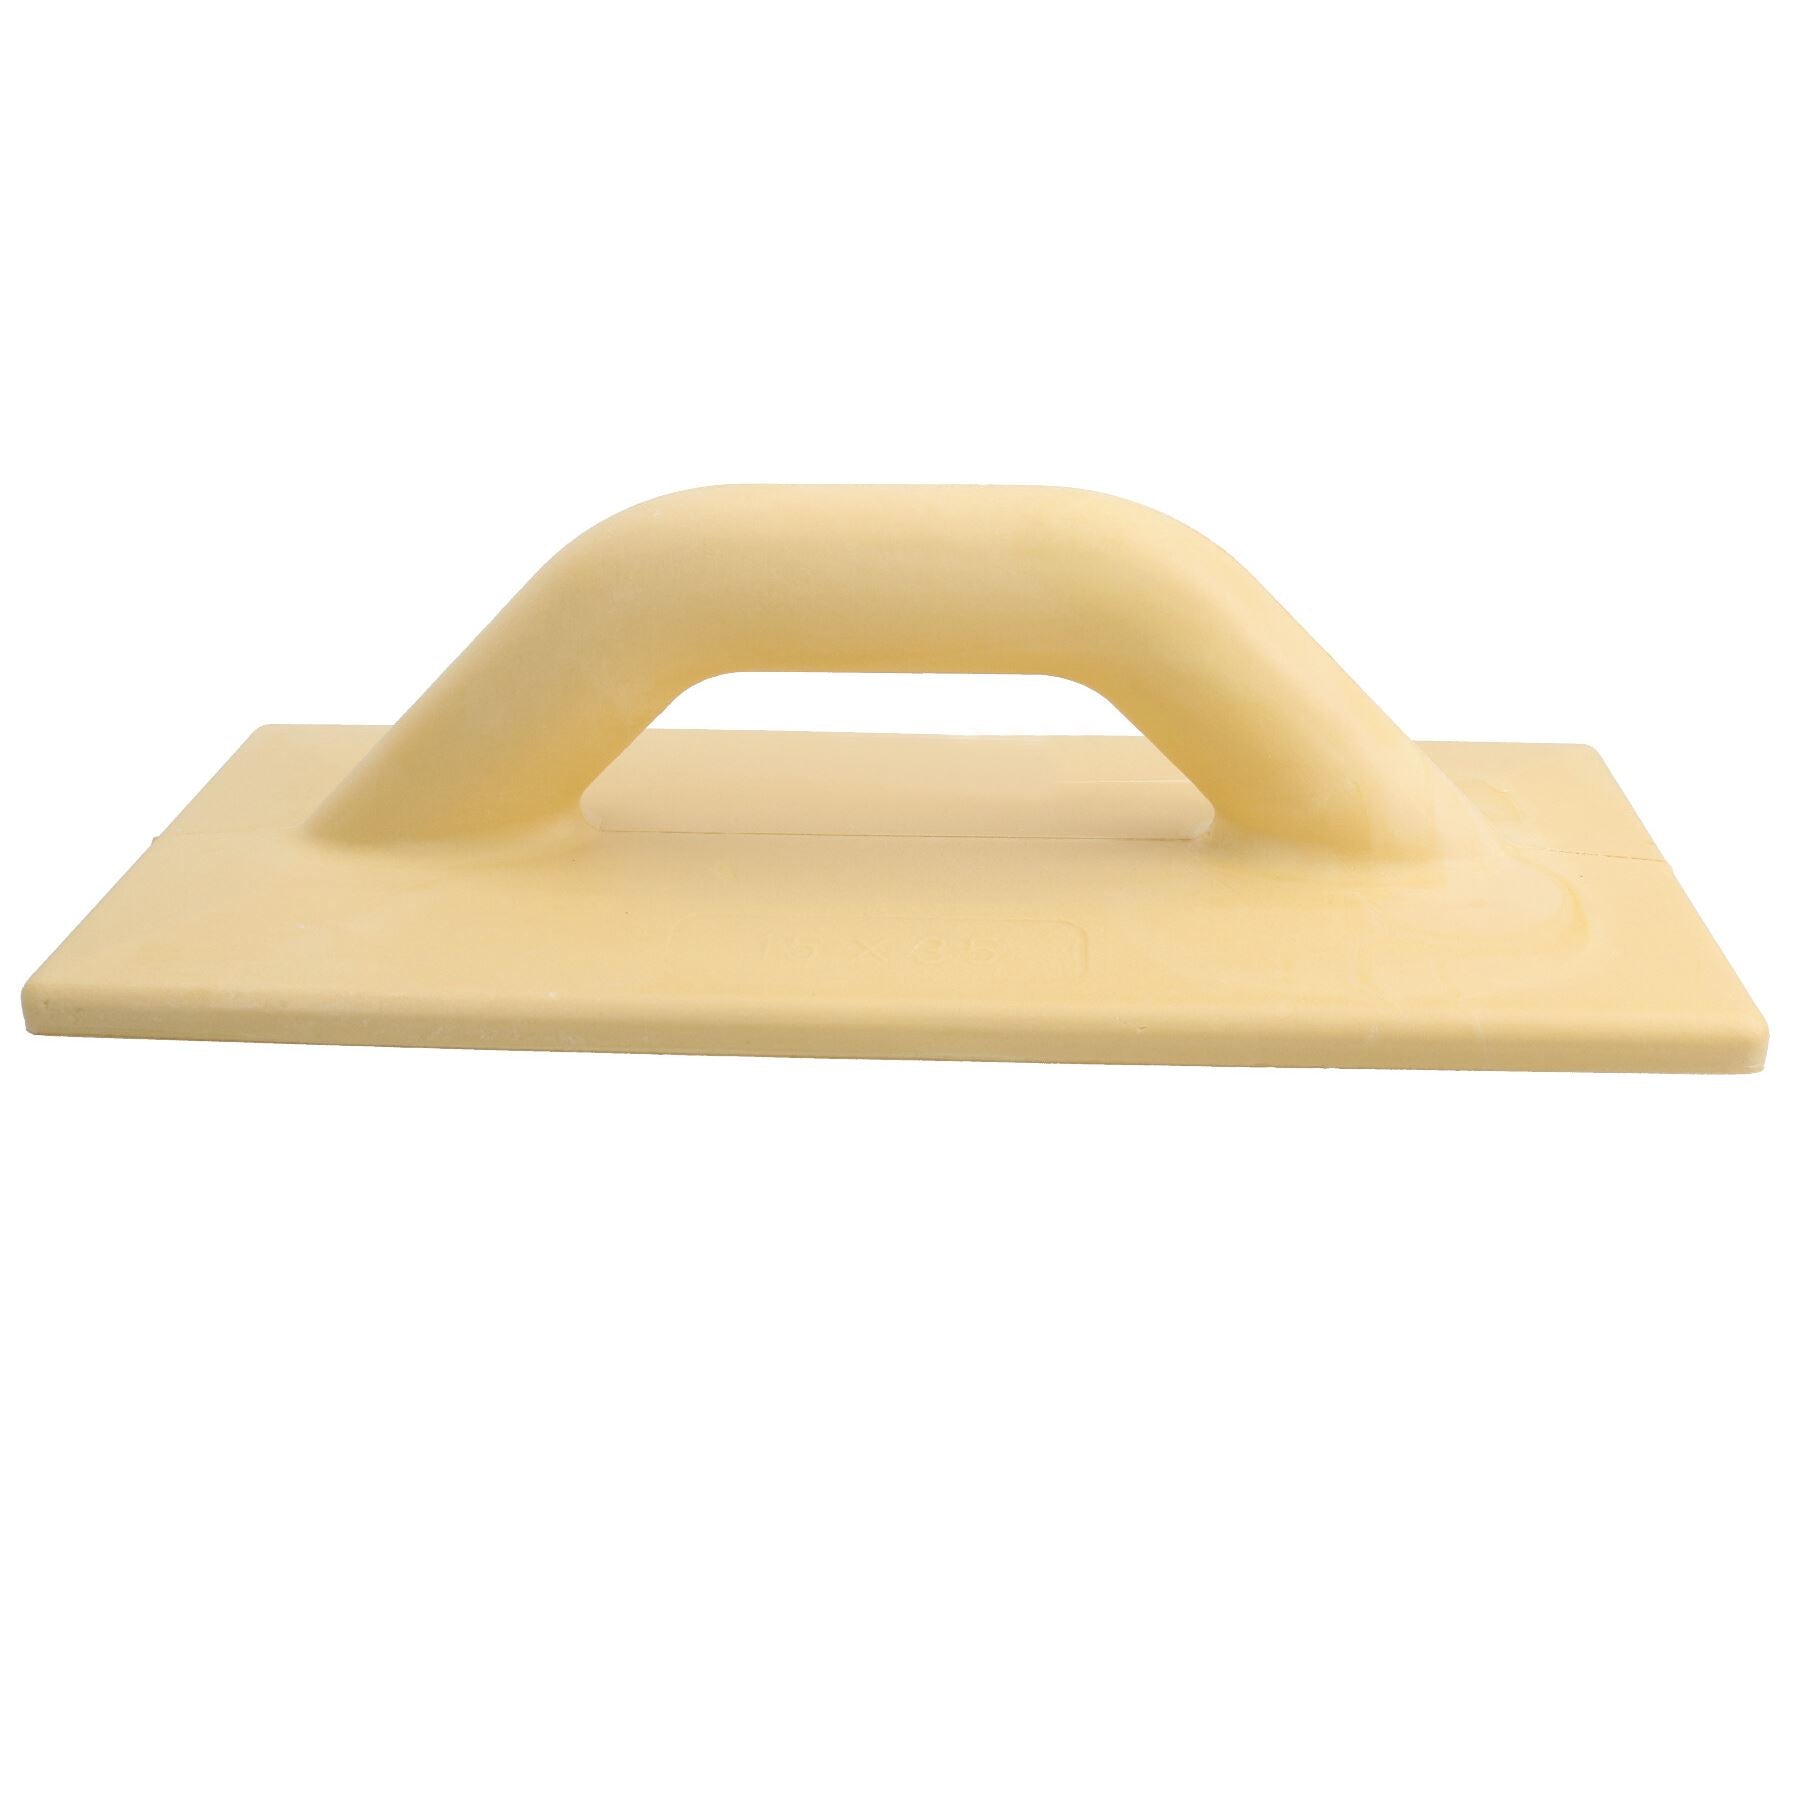 Plastering Plasterers Poly Float Rendering Smoothing Cement Plaster 350 x 130mm